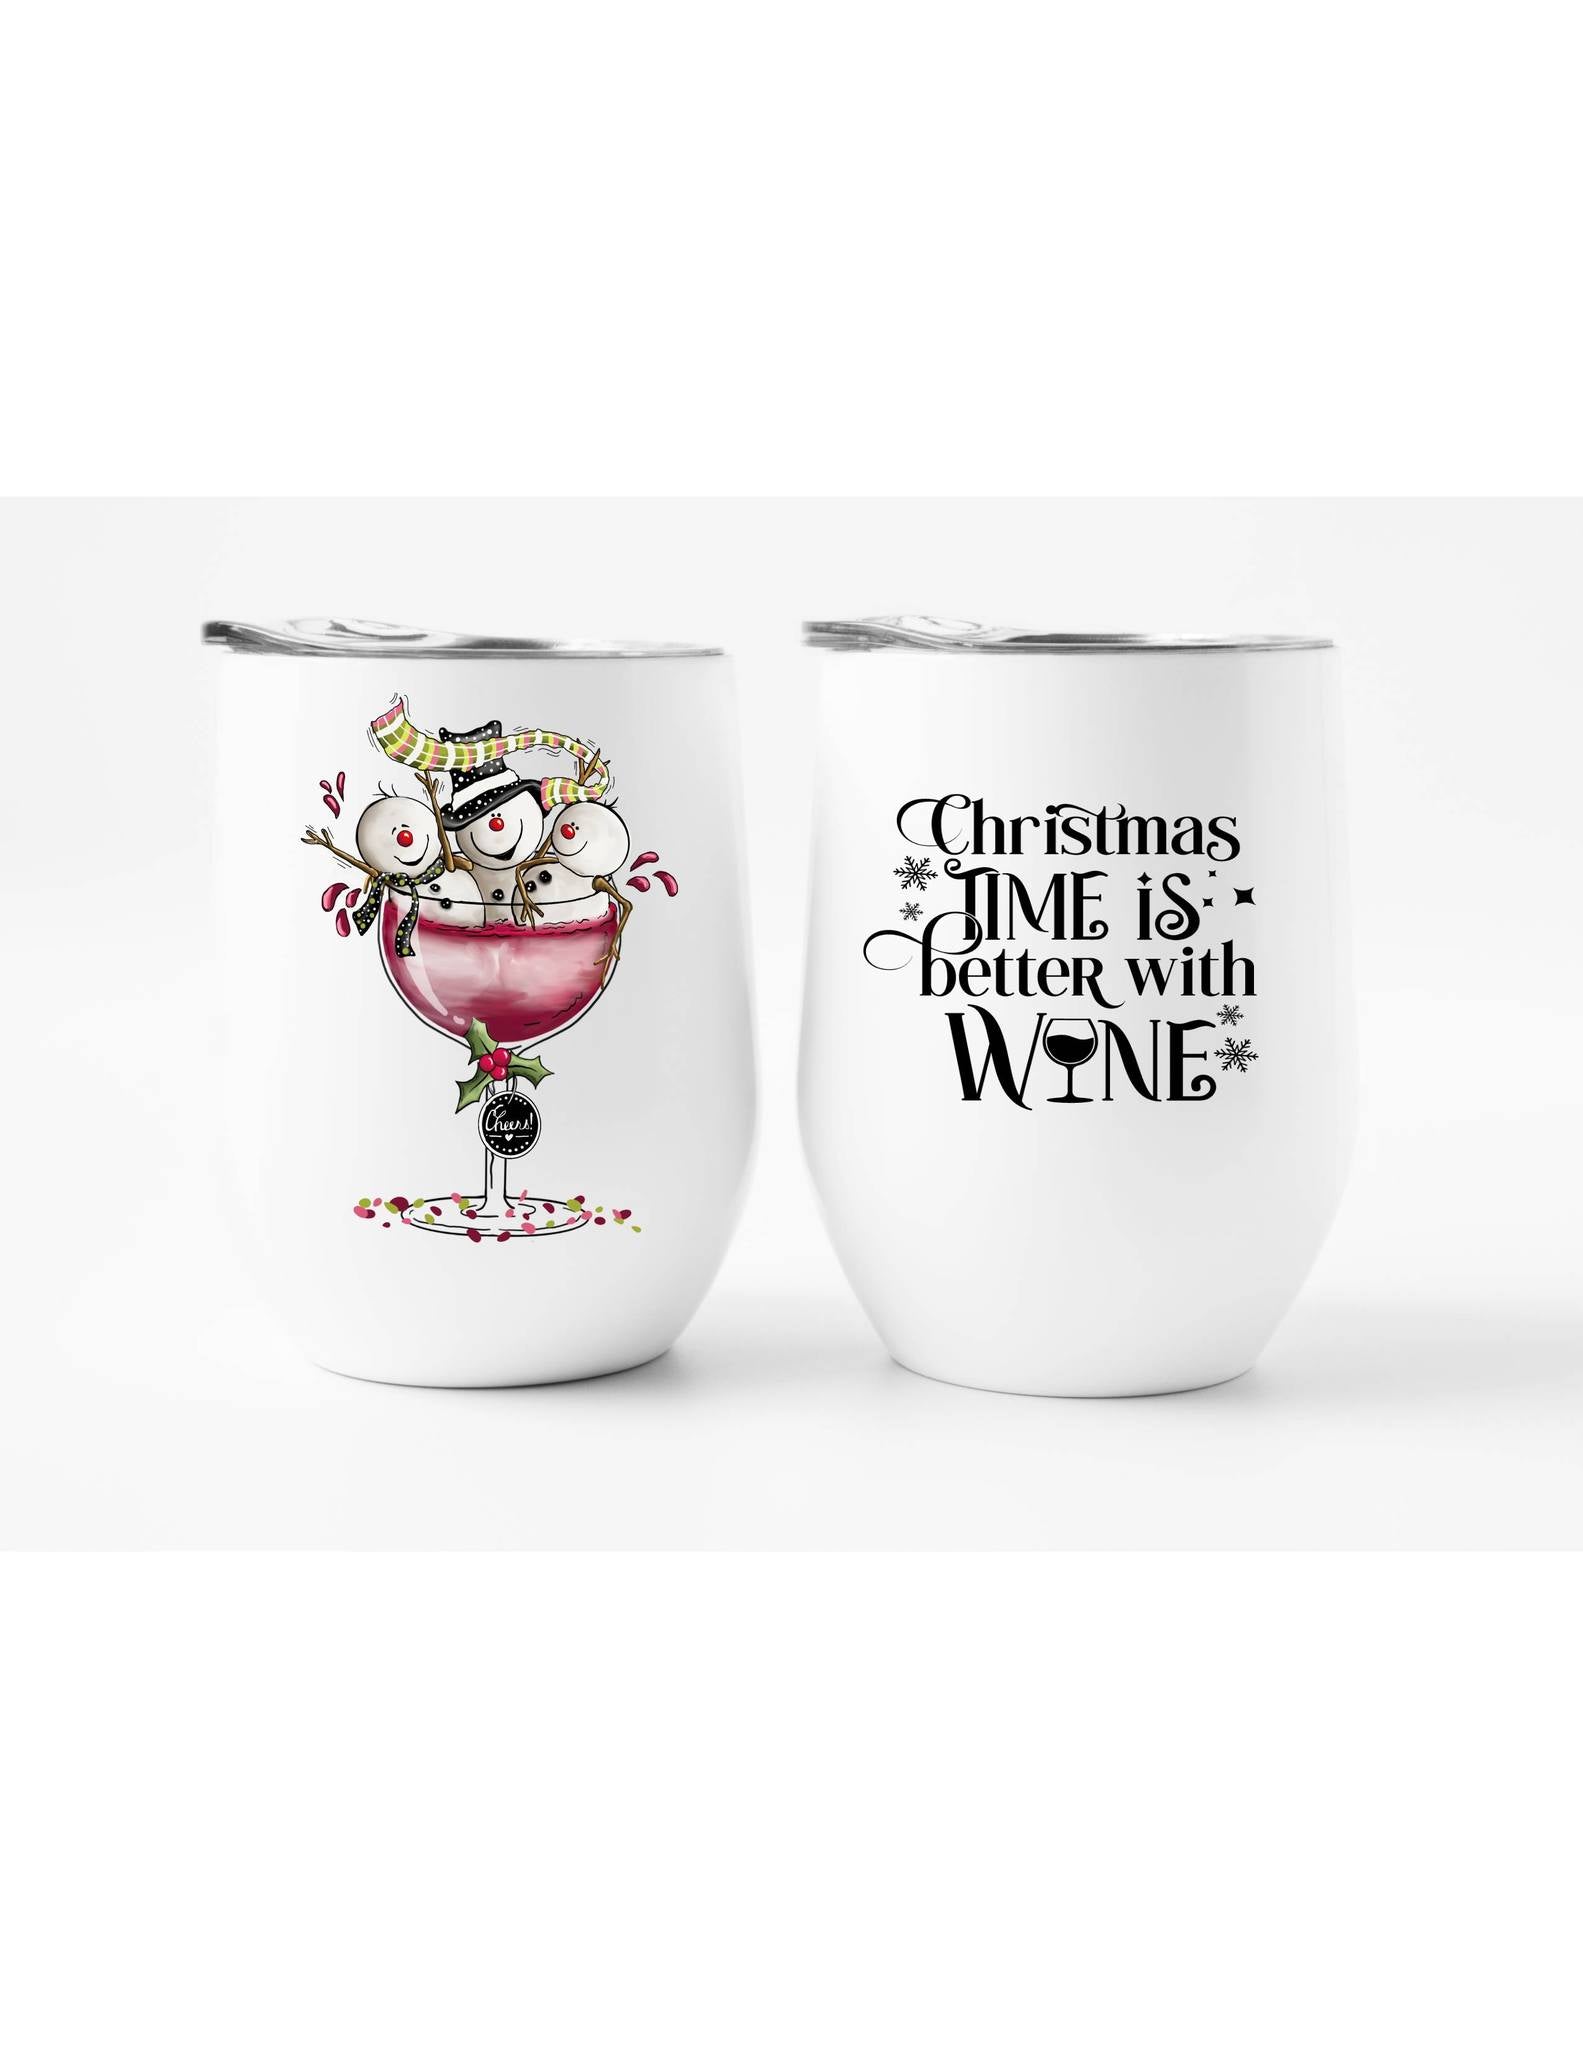 Dreaming of a Wine Christmas - 20 & 30 oz Tumbler - Jefferson St. Designs